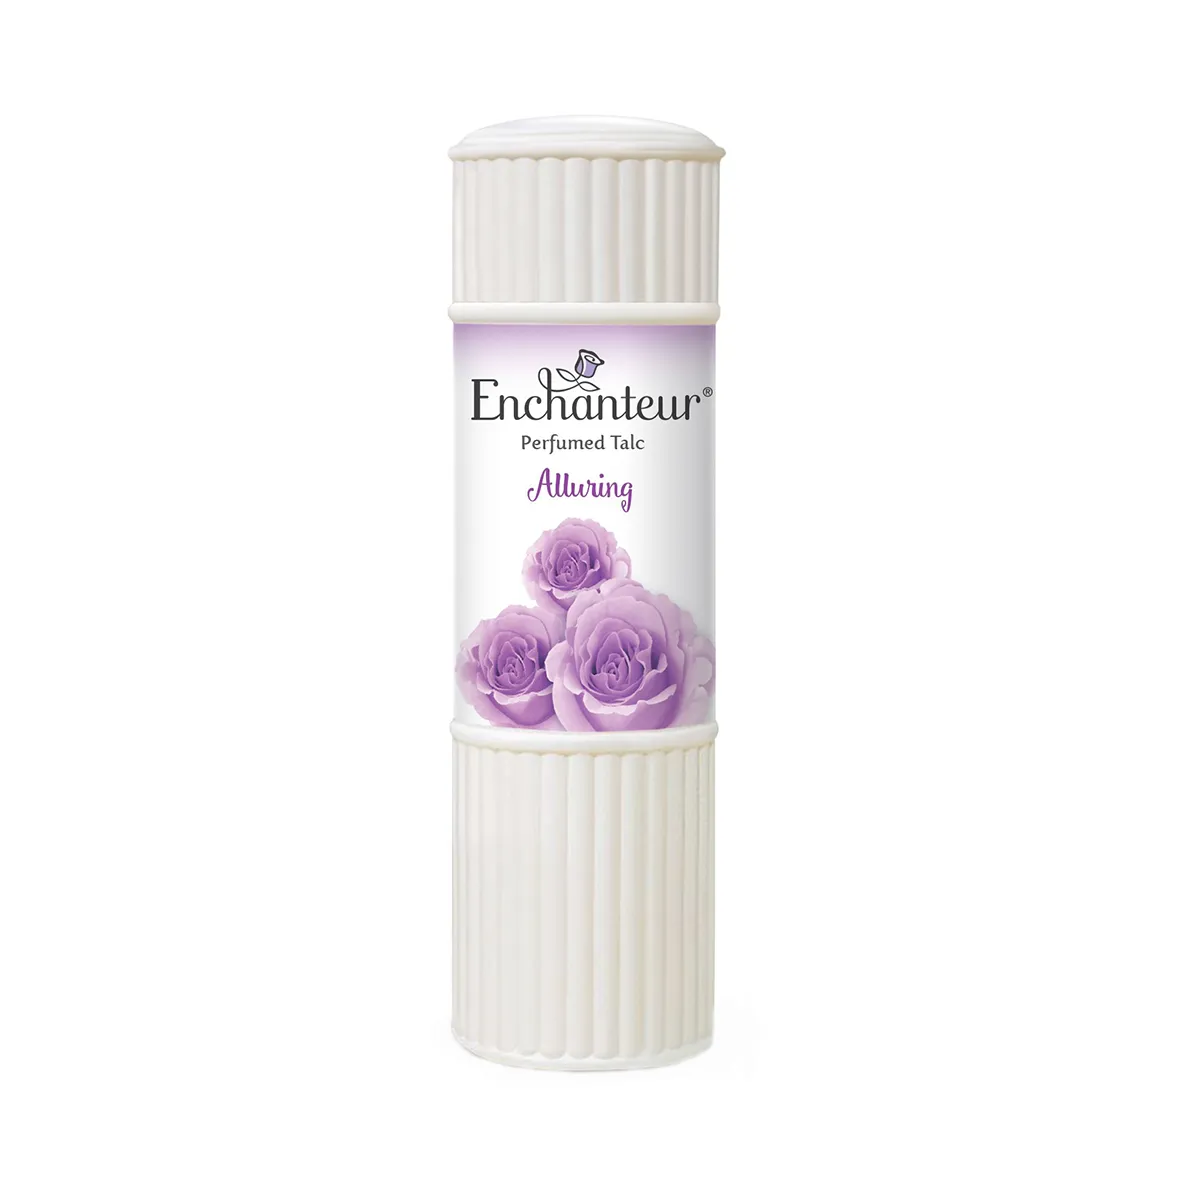 First product image of Enchanteur Alluring Perfumed TALC - 50g